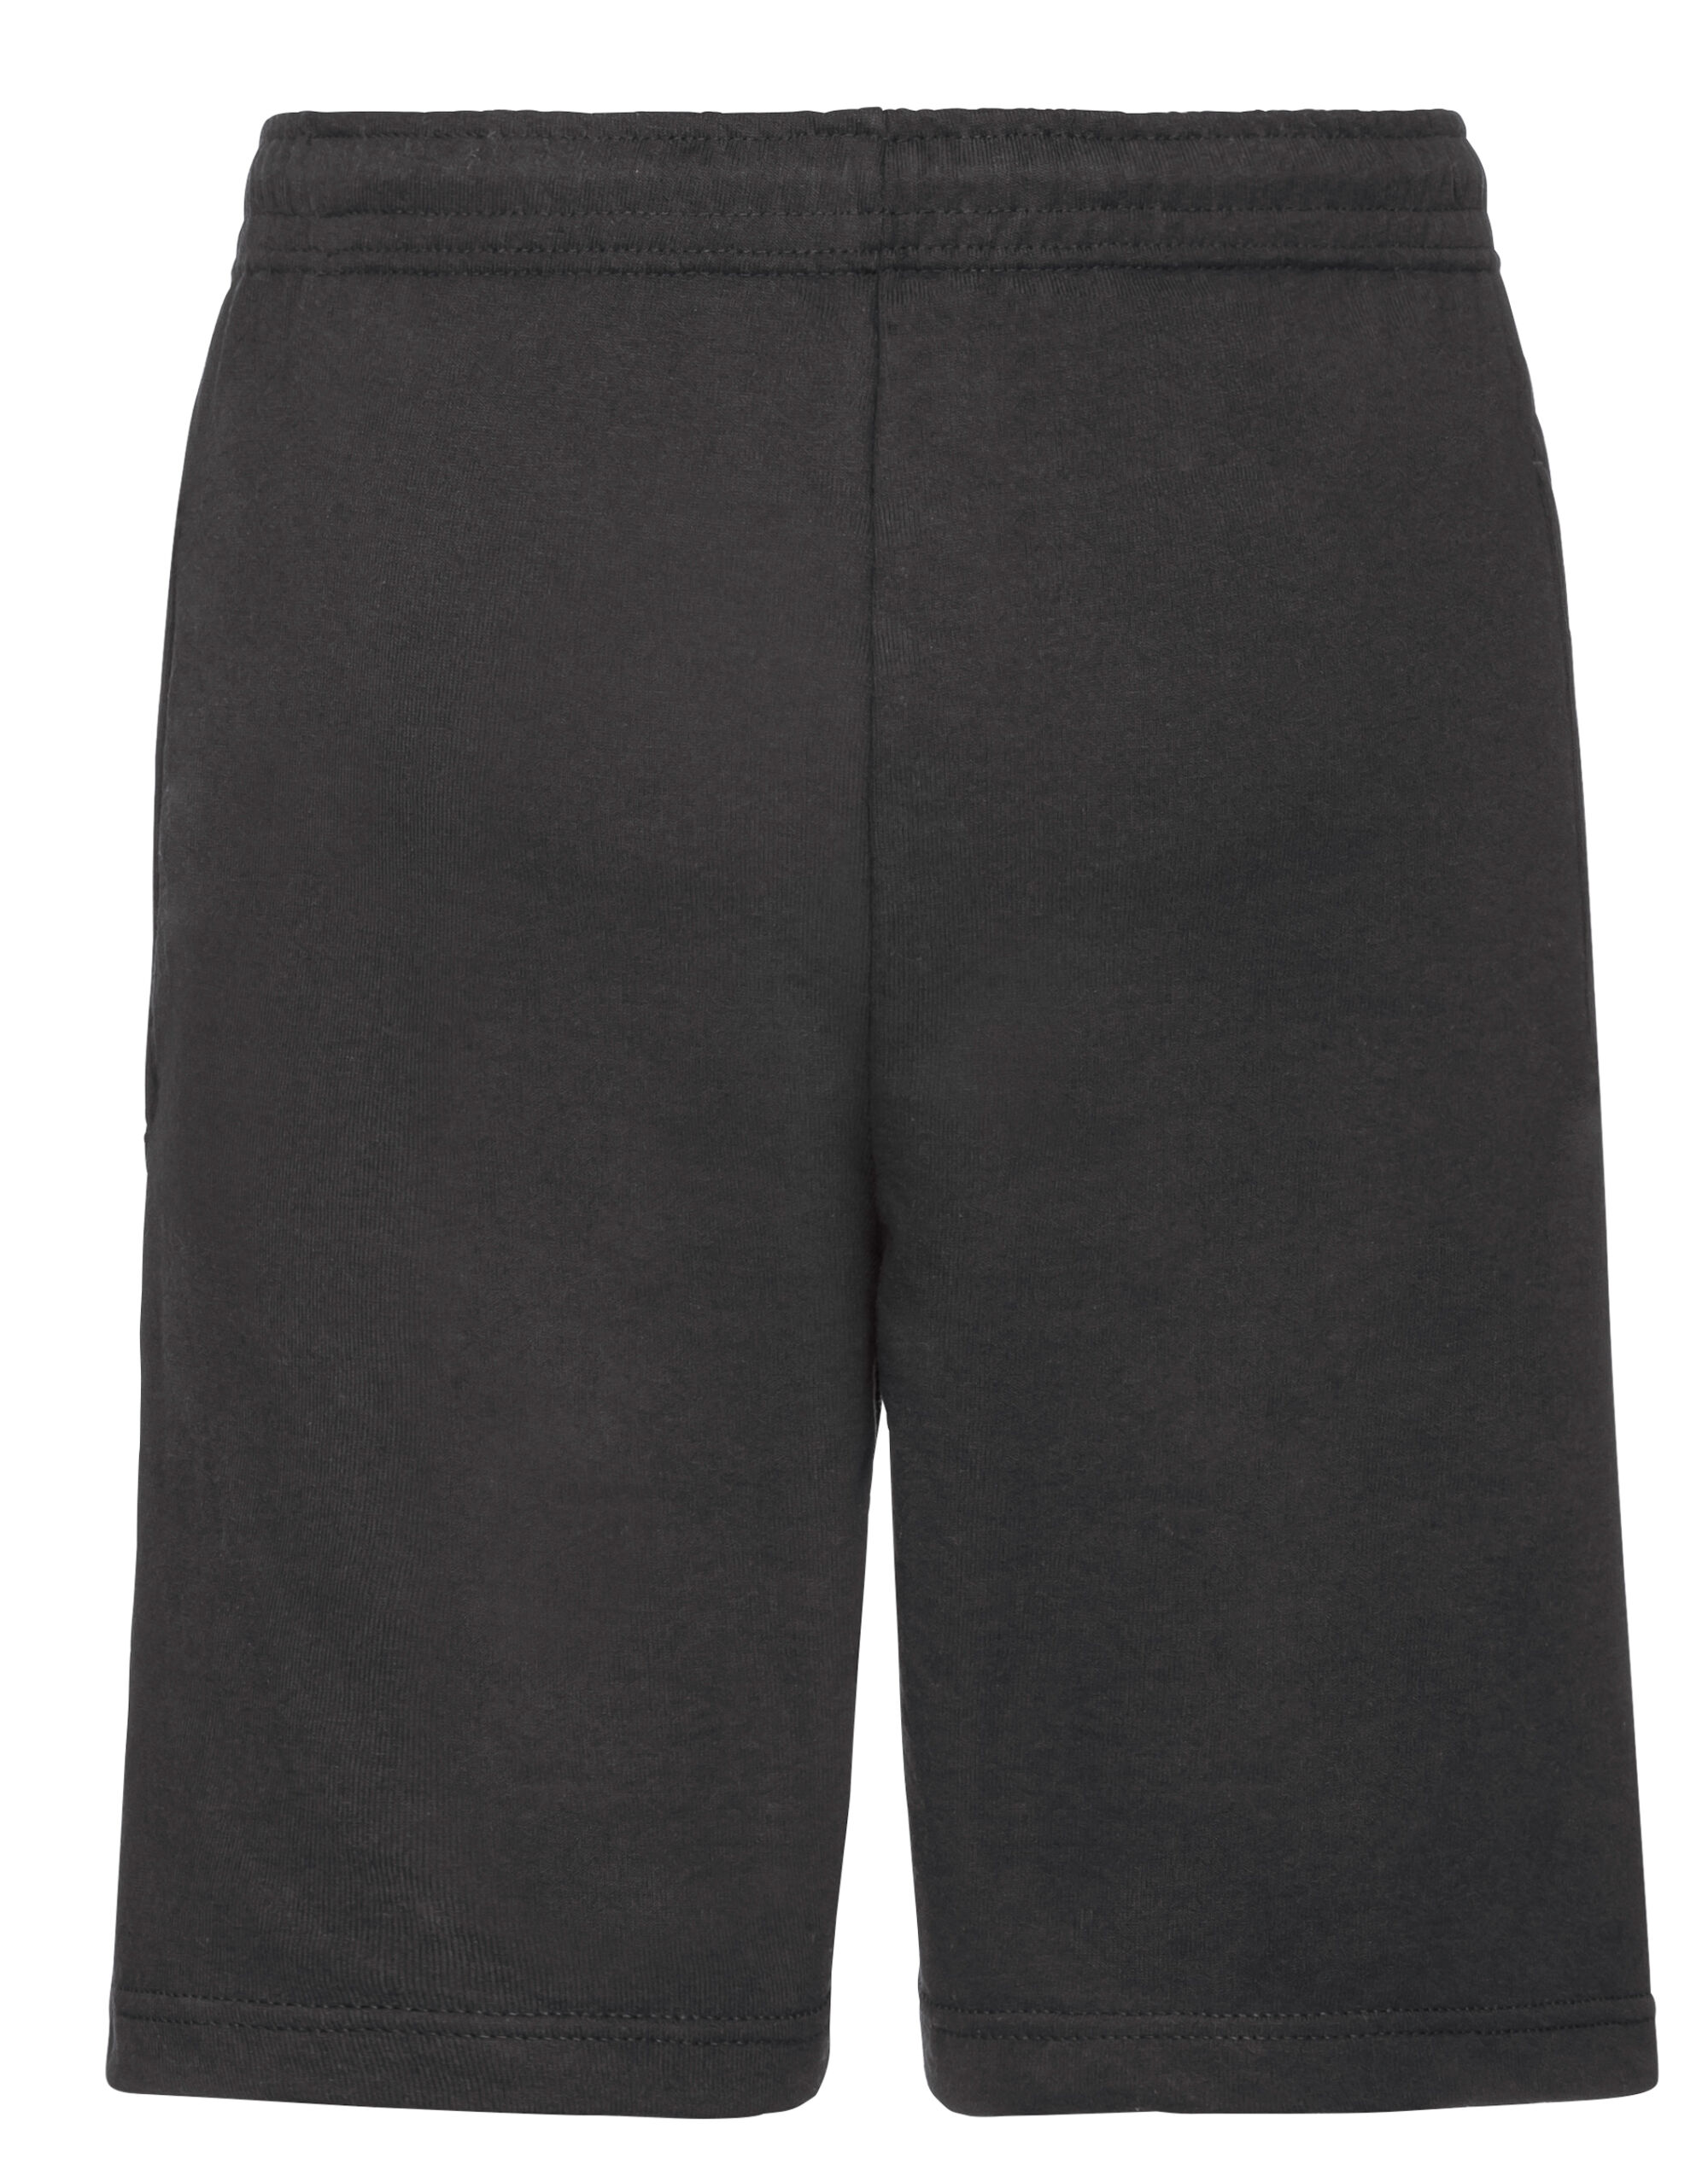 Picture of Men's Lightweight Shorts